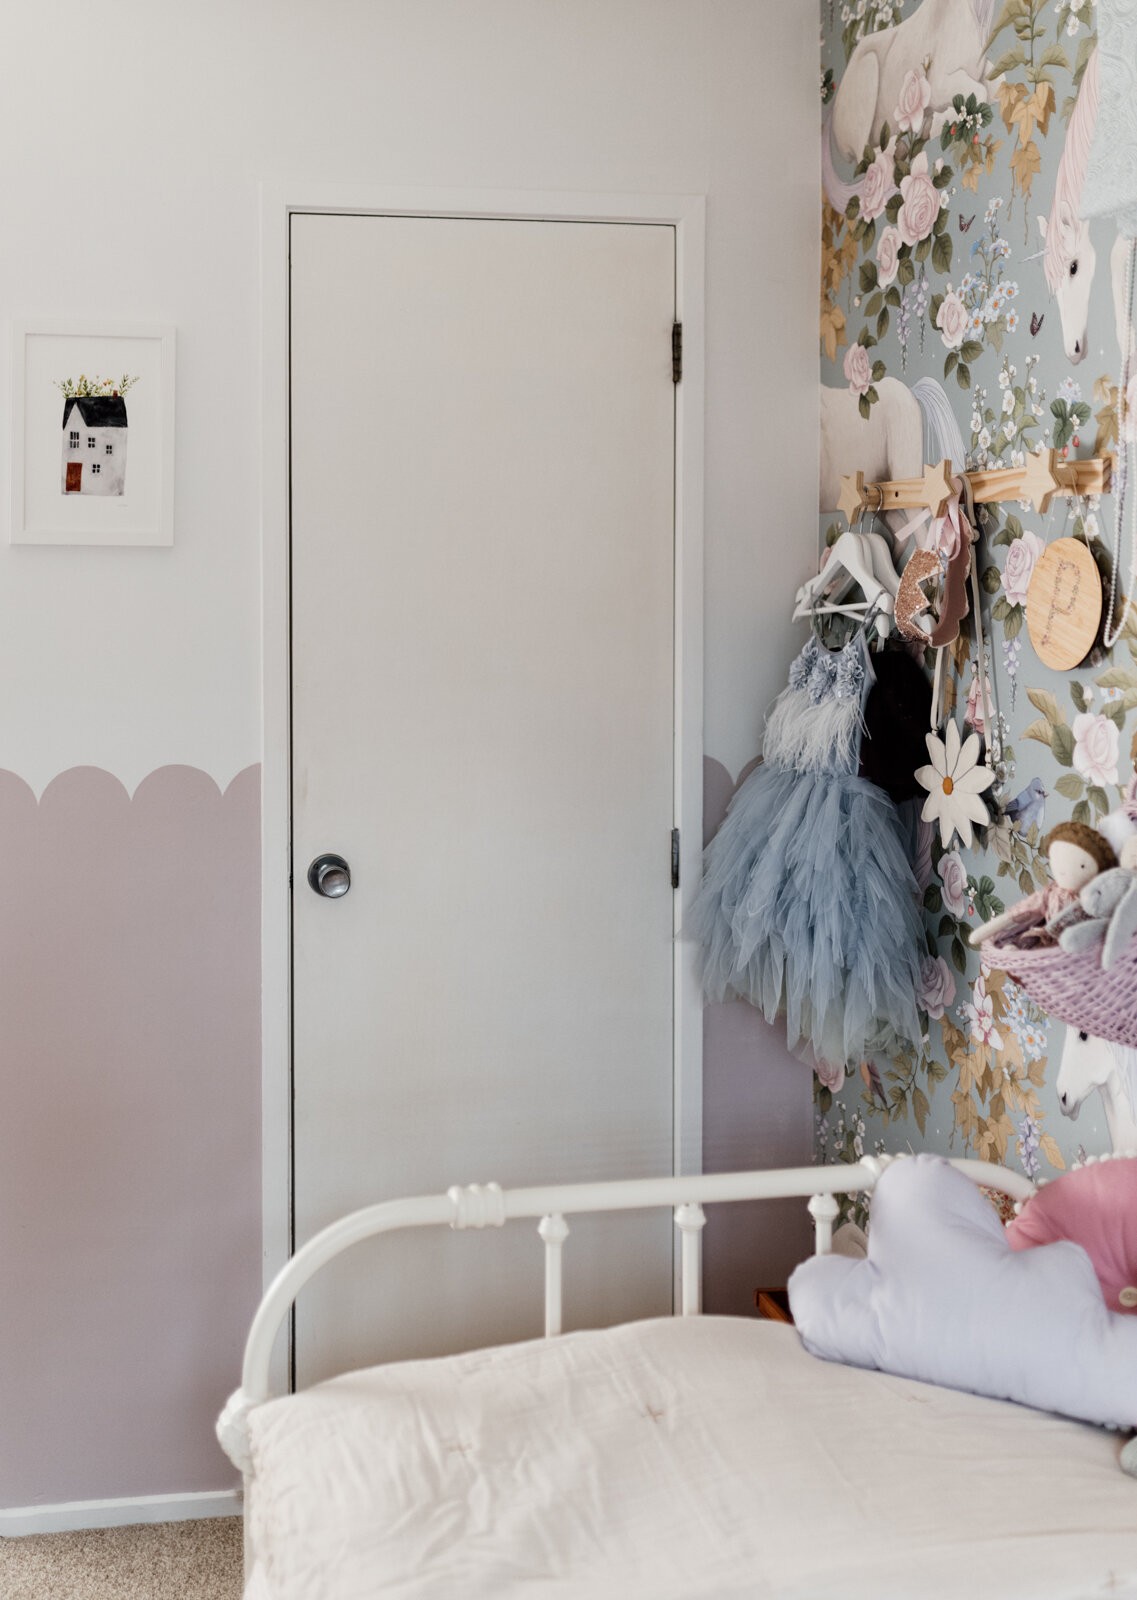 A child's bedroom is painted with a mauve and white scalloped wall effect and adorned with children's decor.